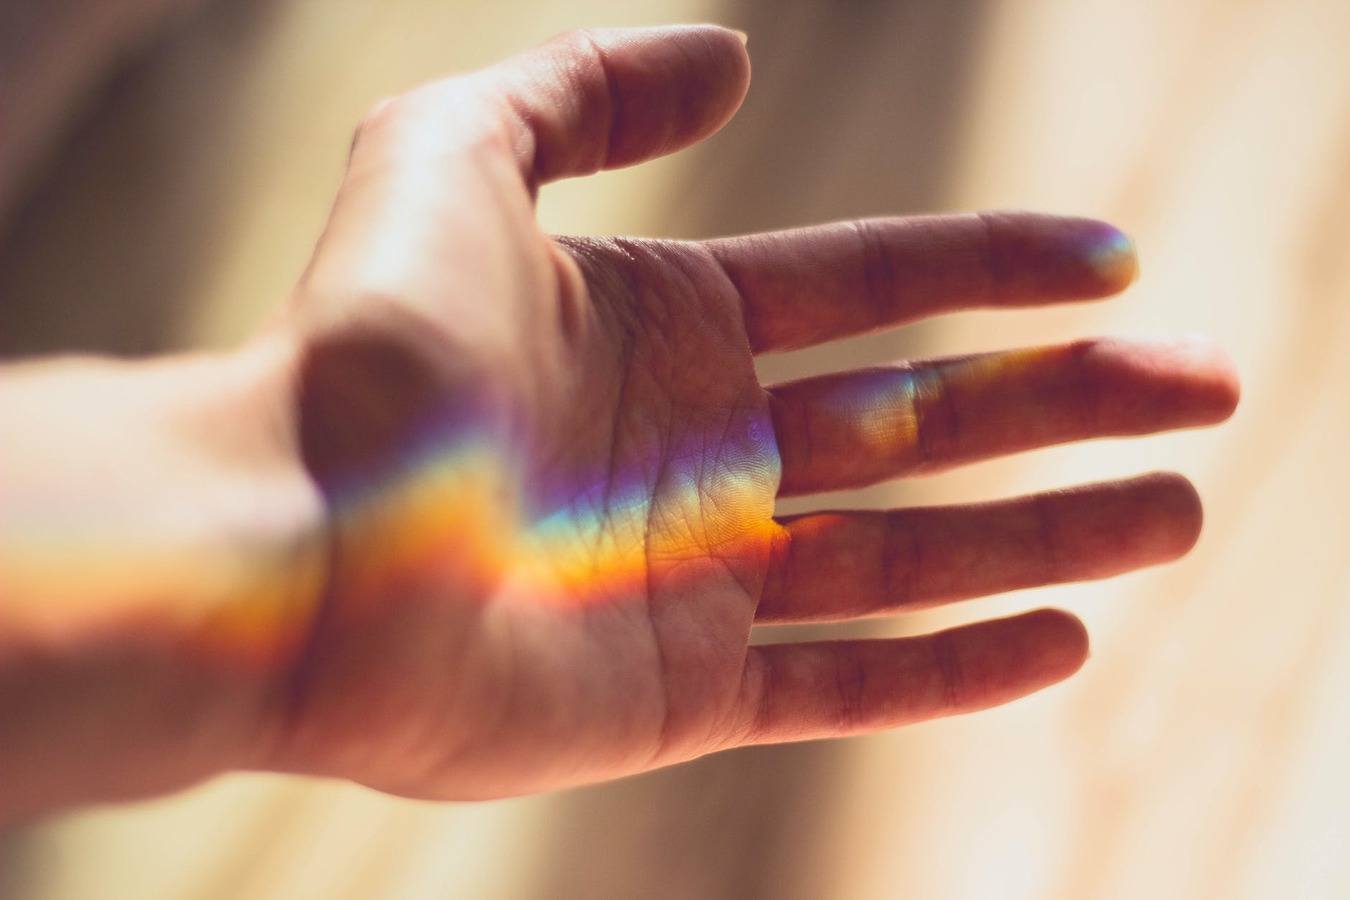 a hand reaching out, it islit up by a line of rainbow spectrum light